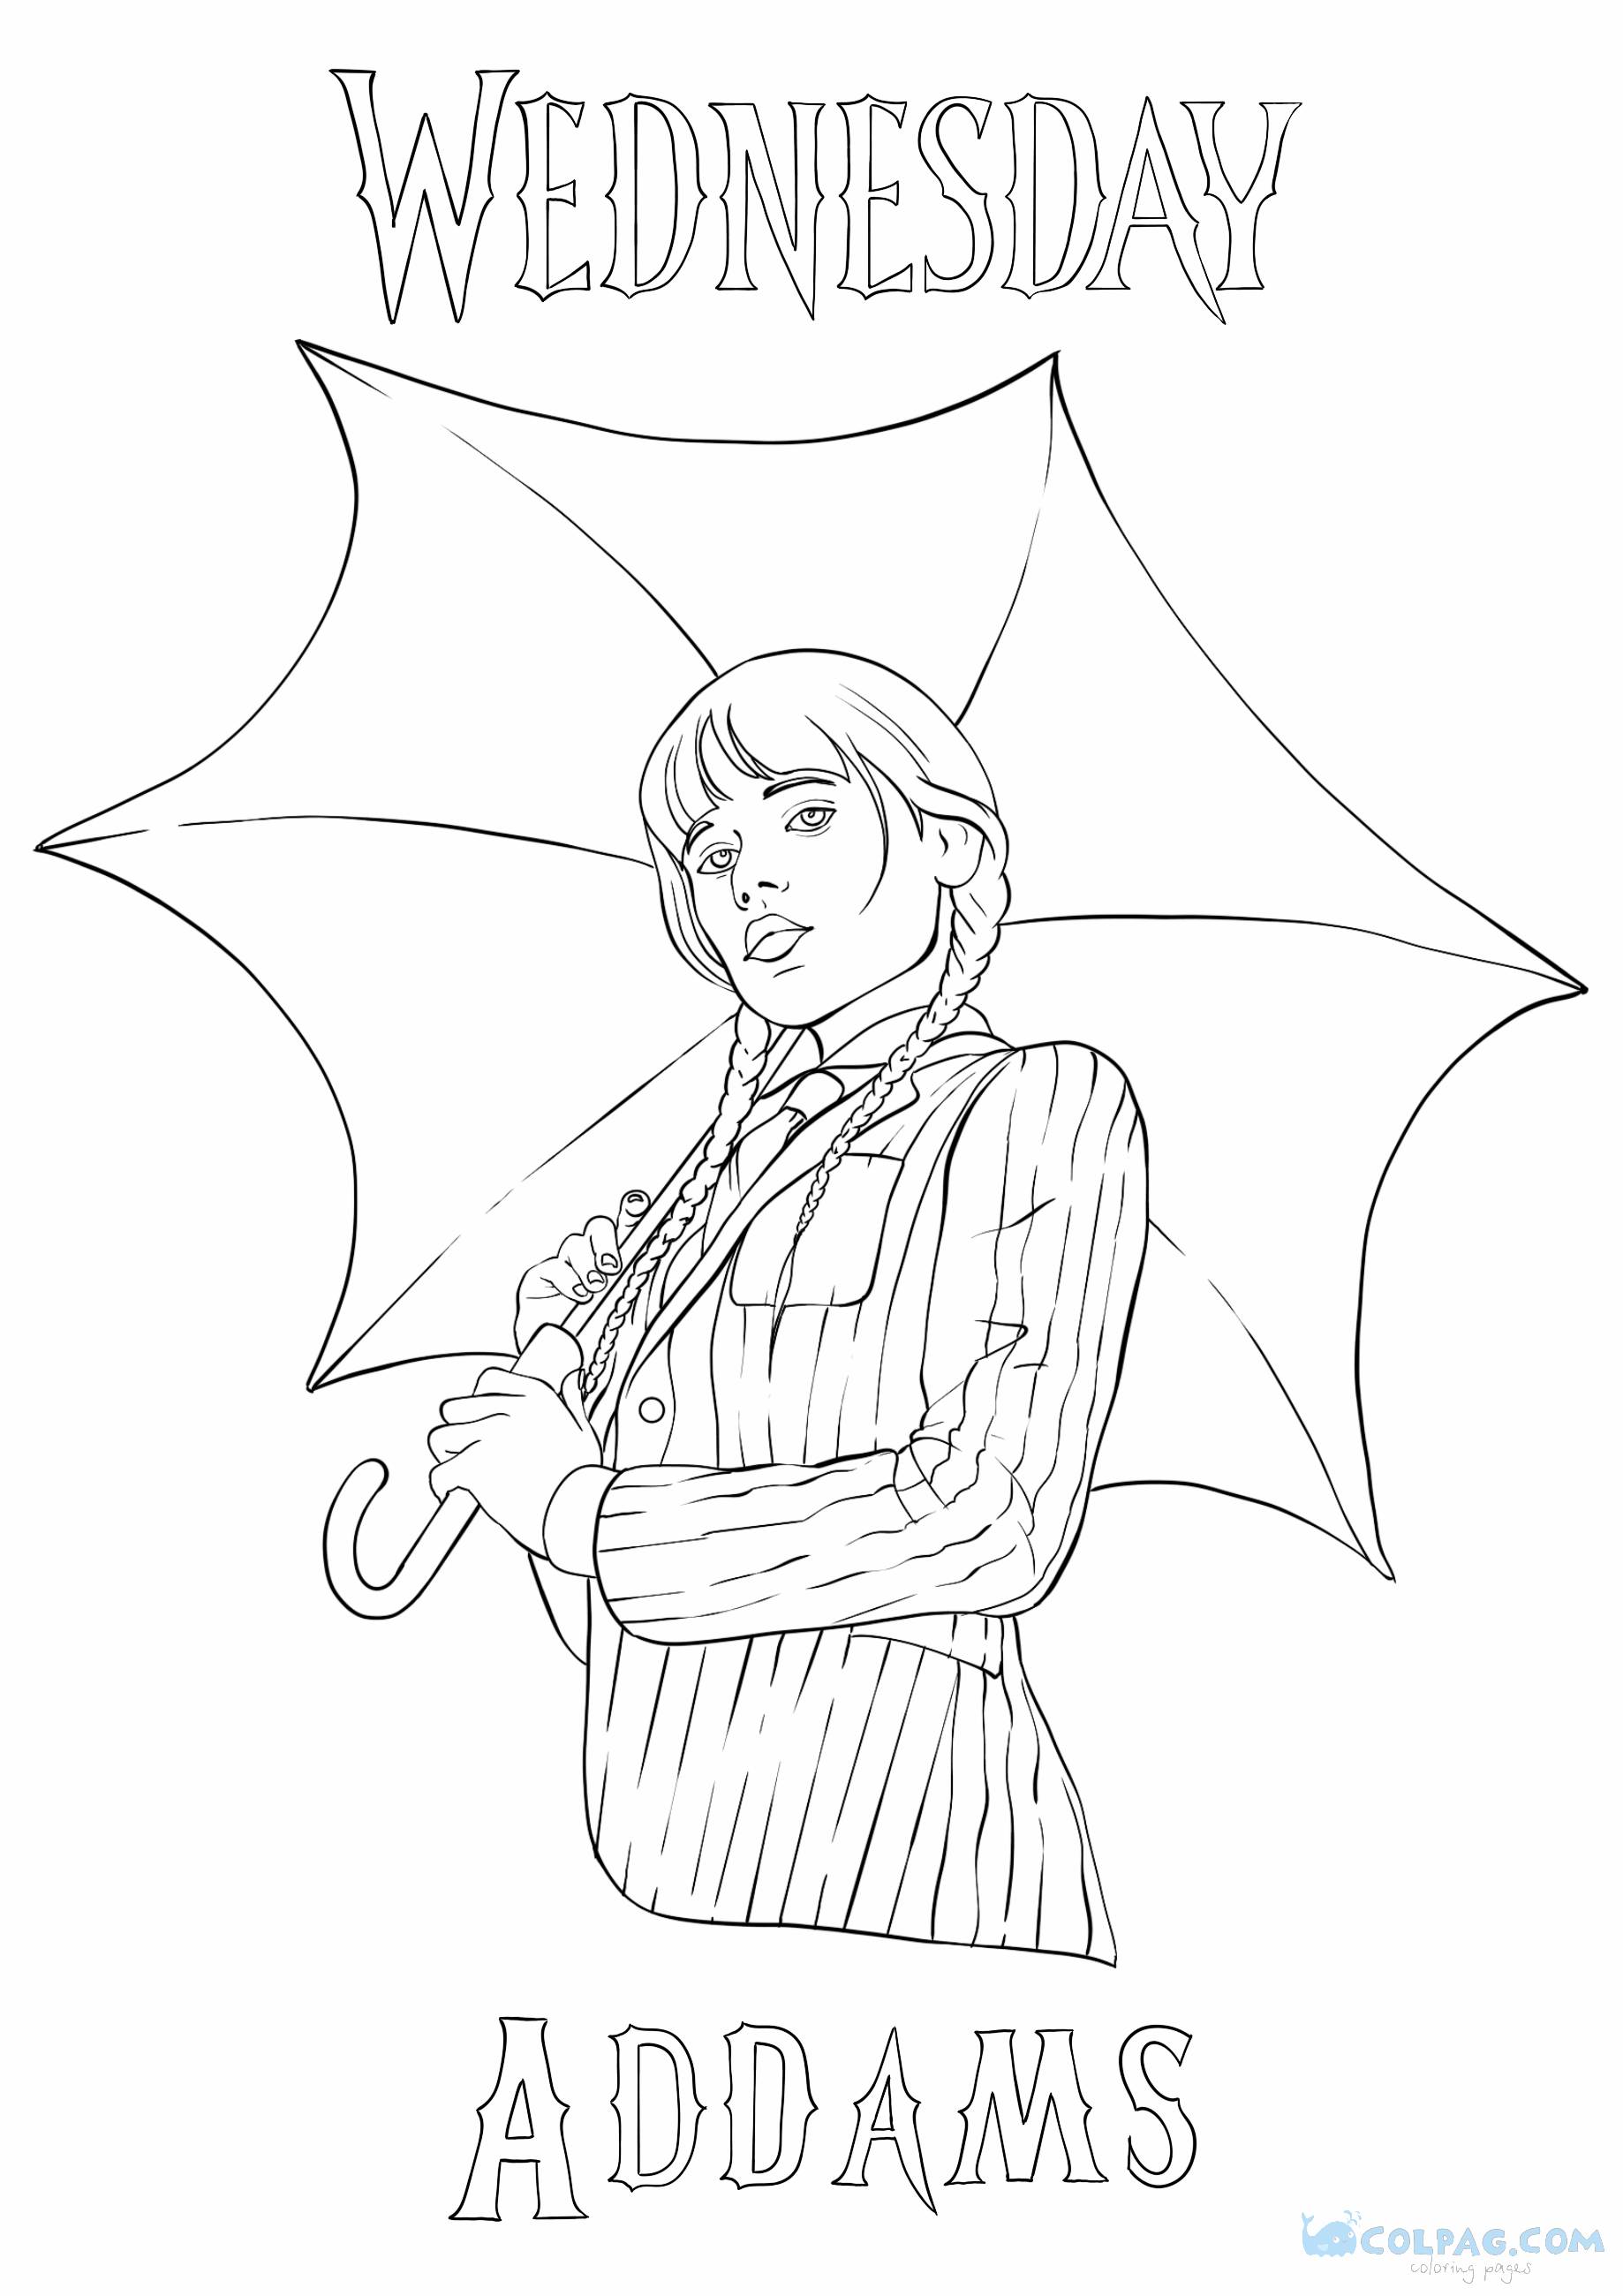 wednesday-addams-coloring-page-colpag-com-16